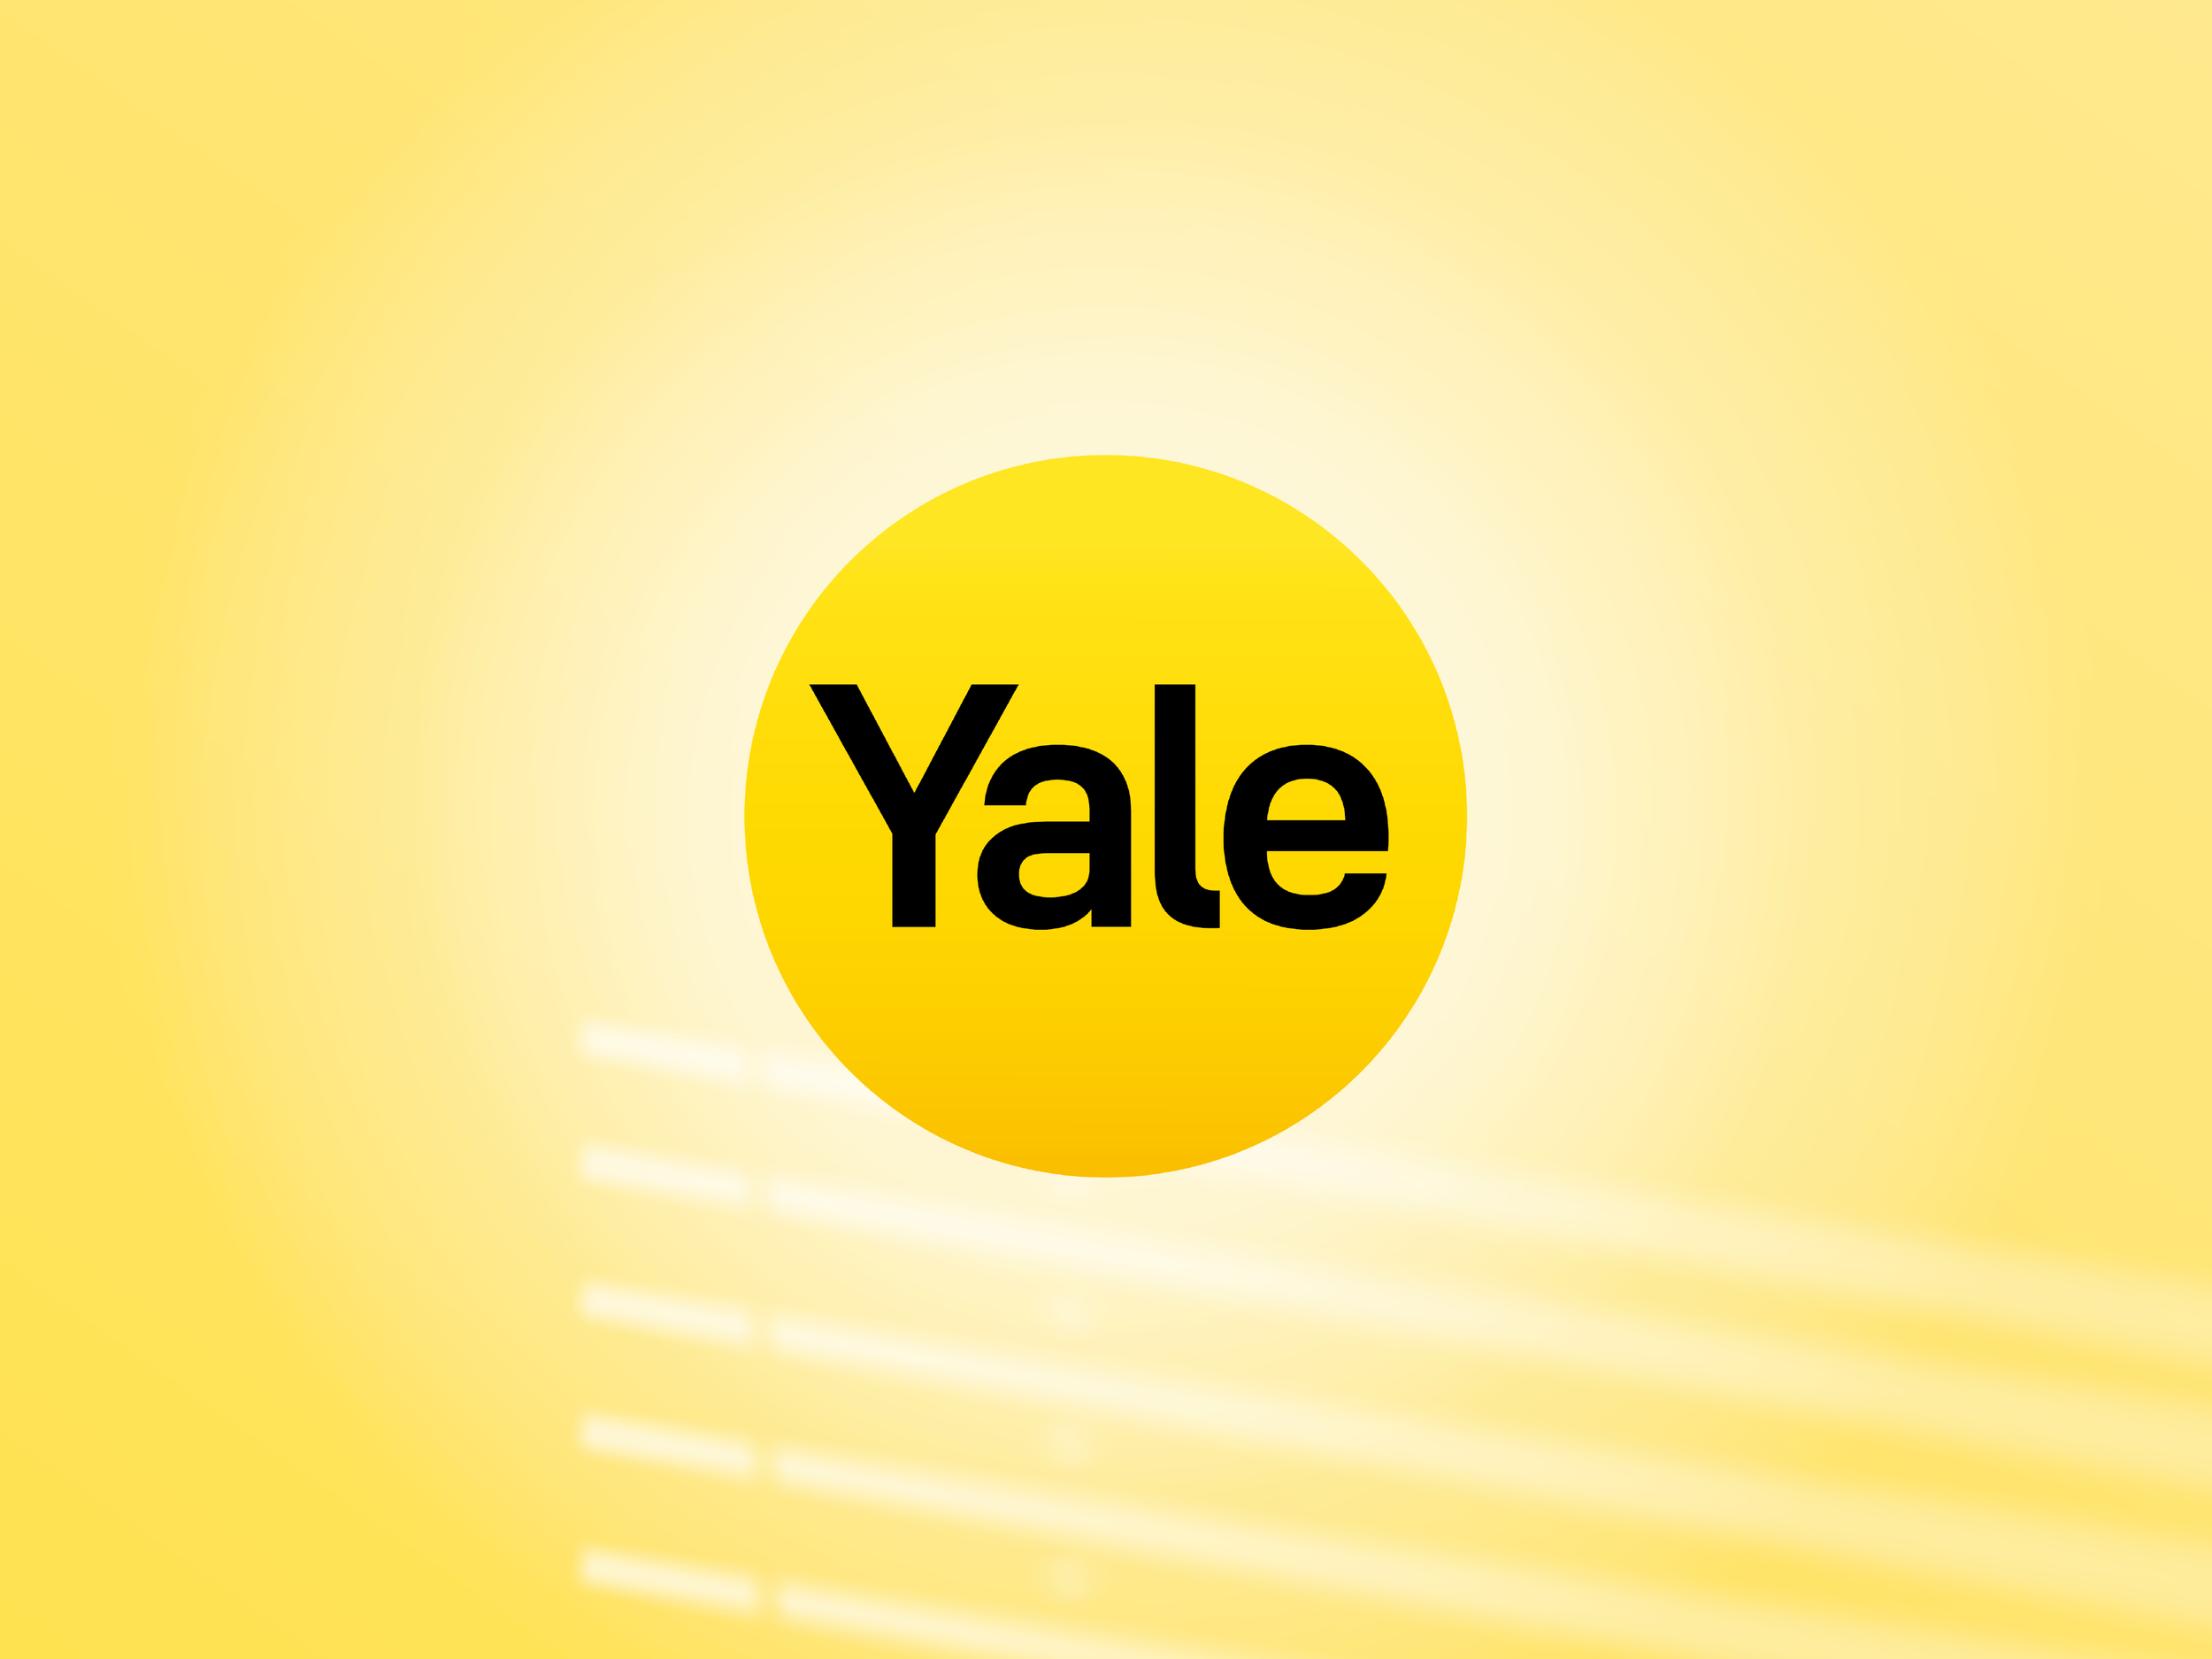 YALE.png